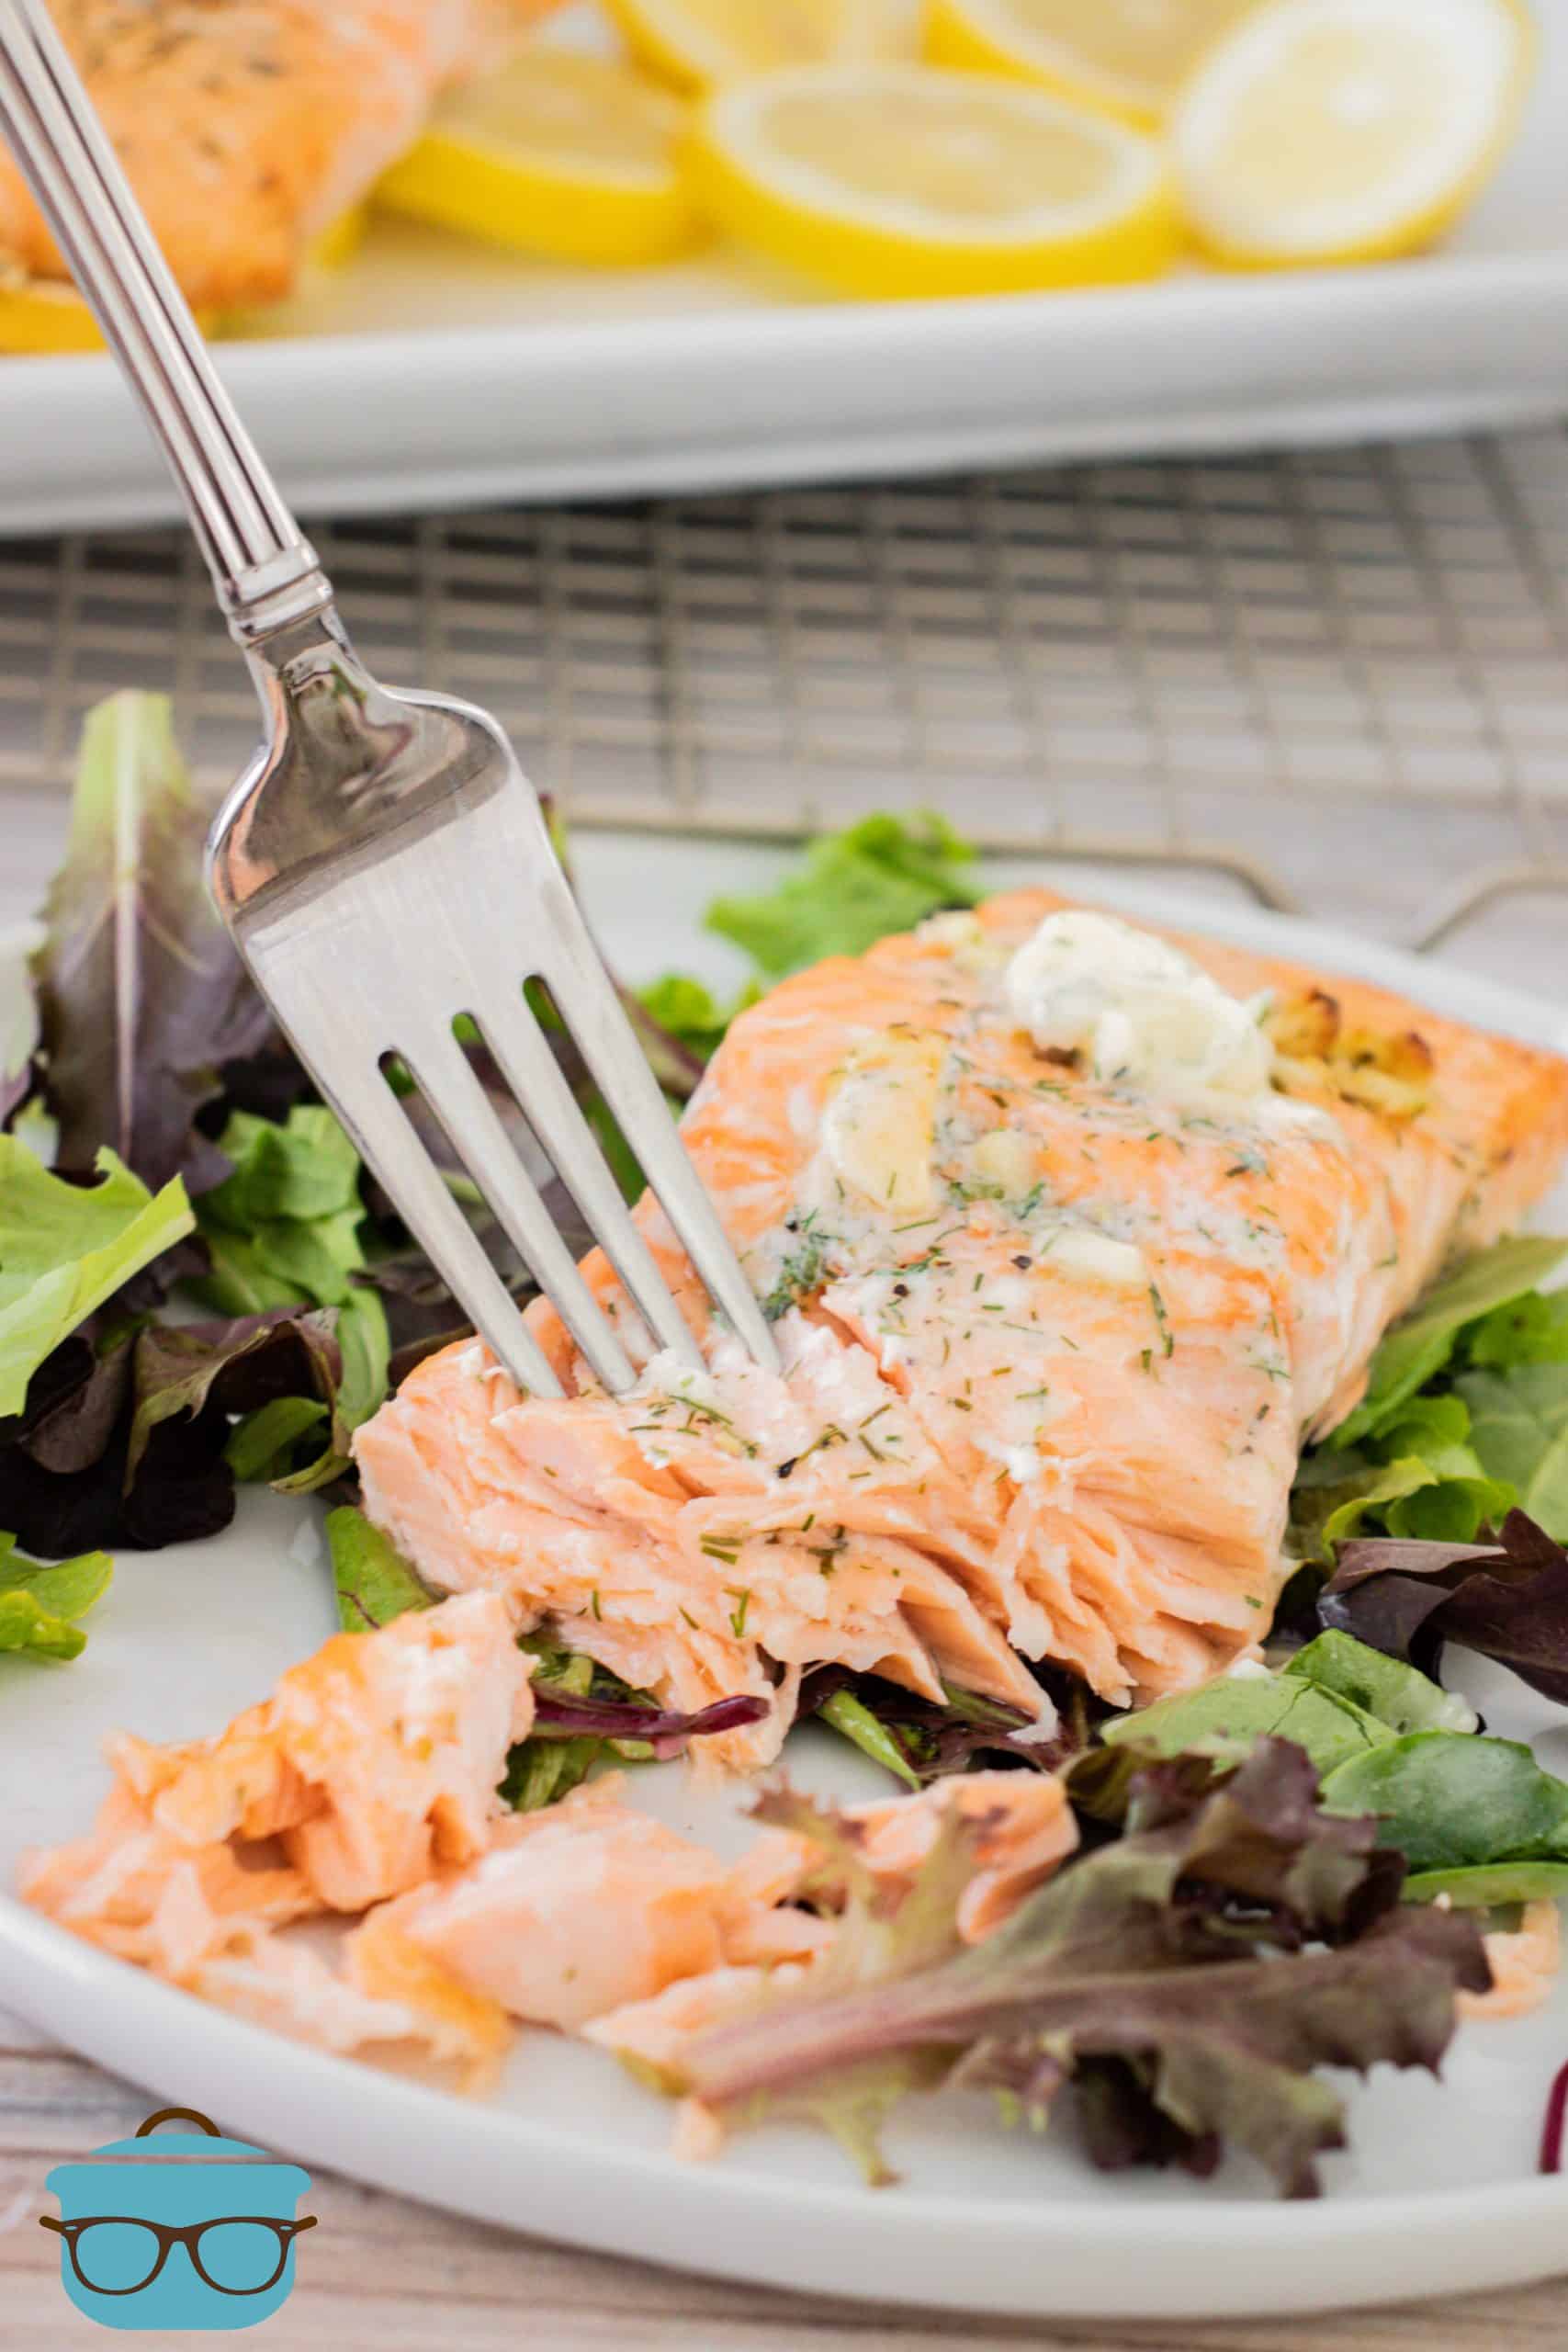 fully cooked salmon on a bed of lettuce with a fork on the salmon slice.